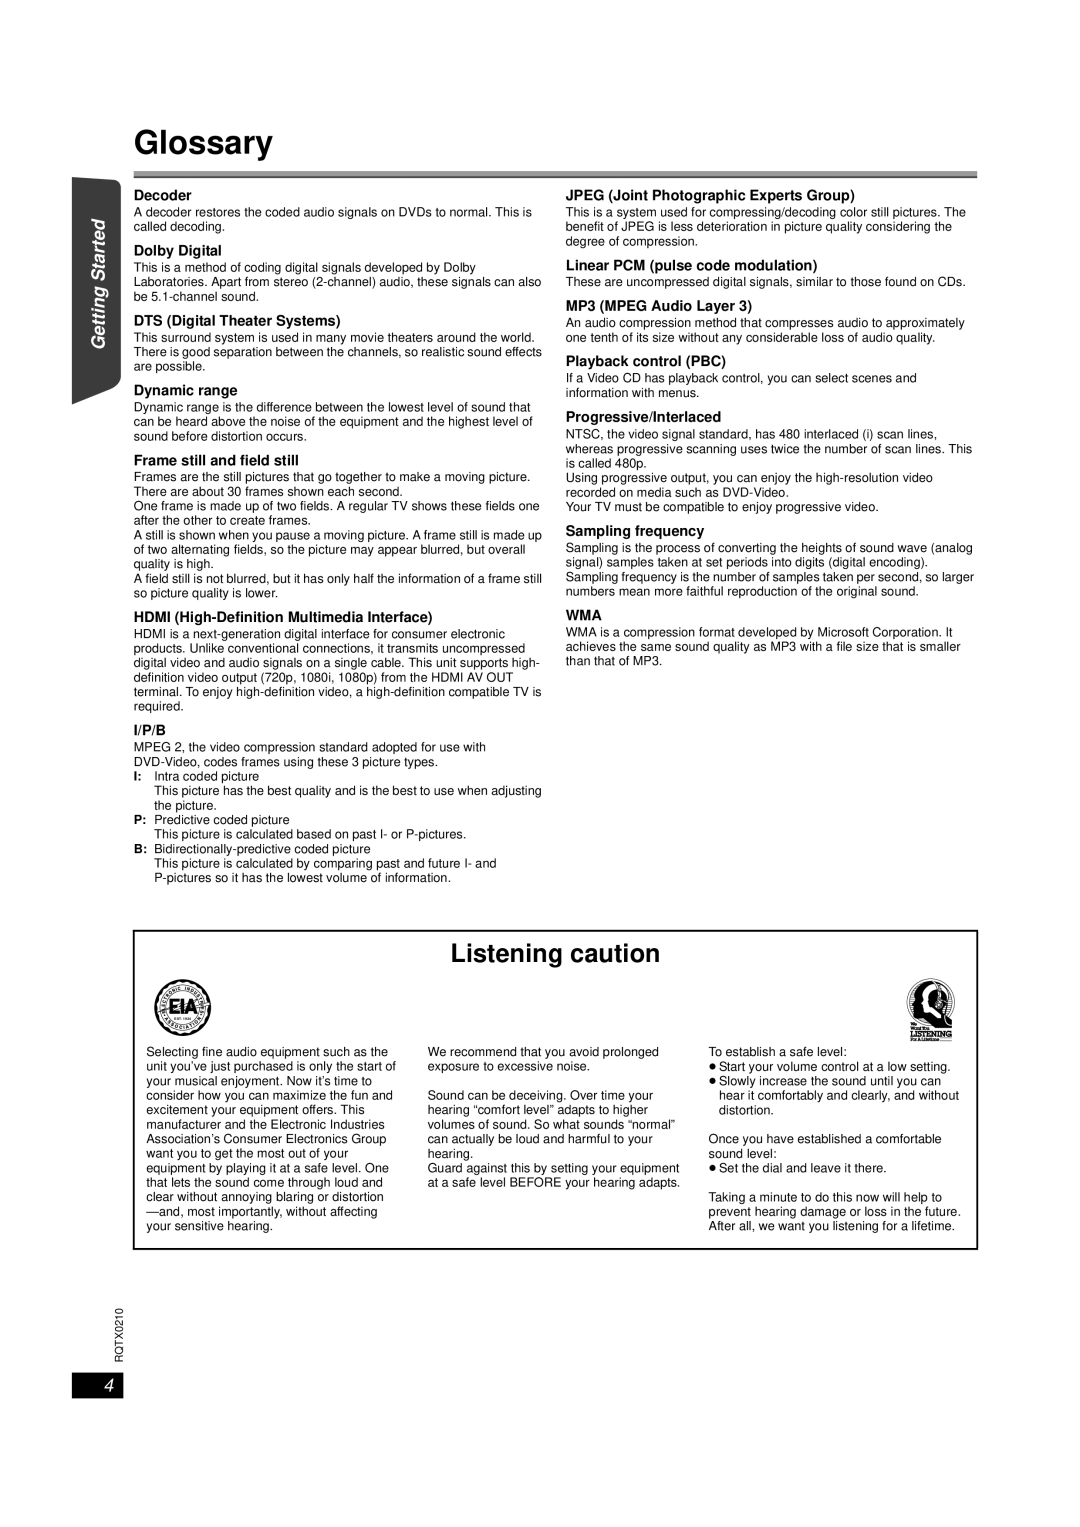 Panasonic SC-PT670, SC-PT673 manual Glossary, Listening caution, Getting Started Playing Discs, Other Operations Reference 